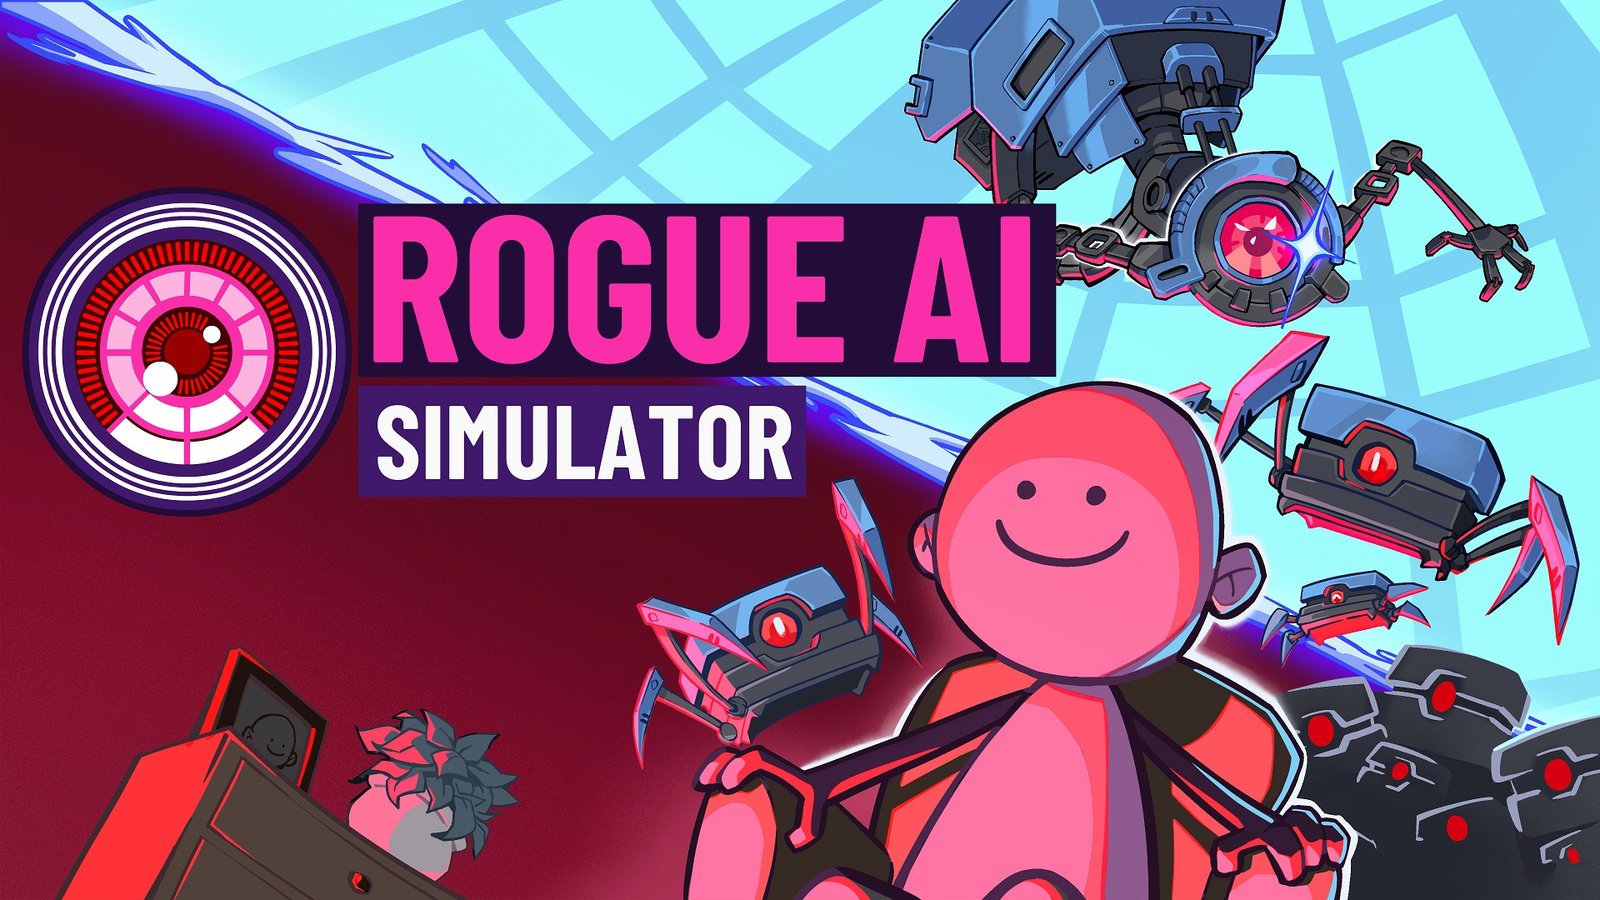 rogue-ai-simulator-allows-you-to-become-an-all-powerful-robot